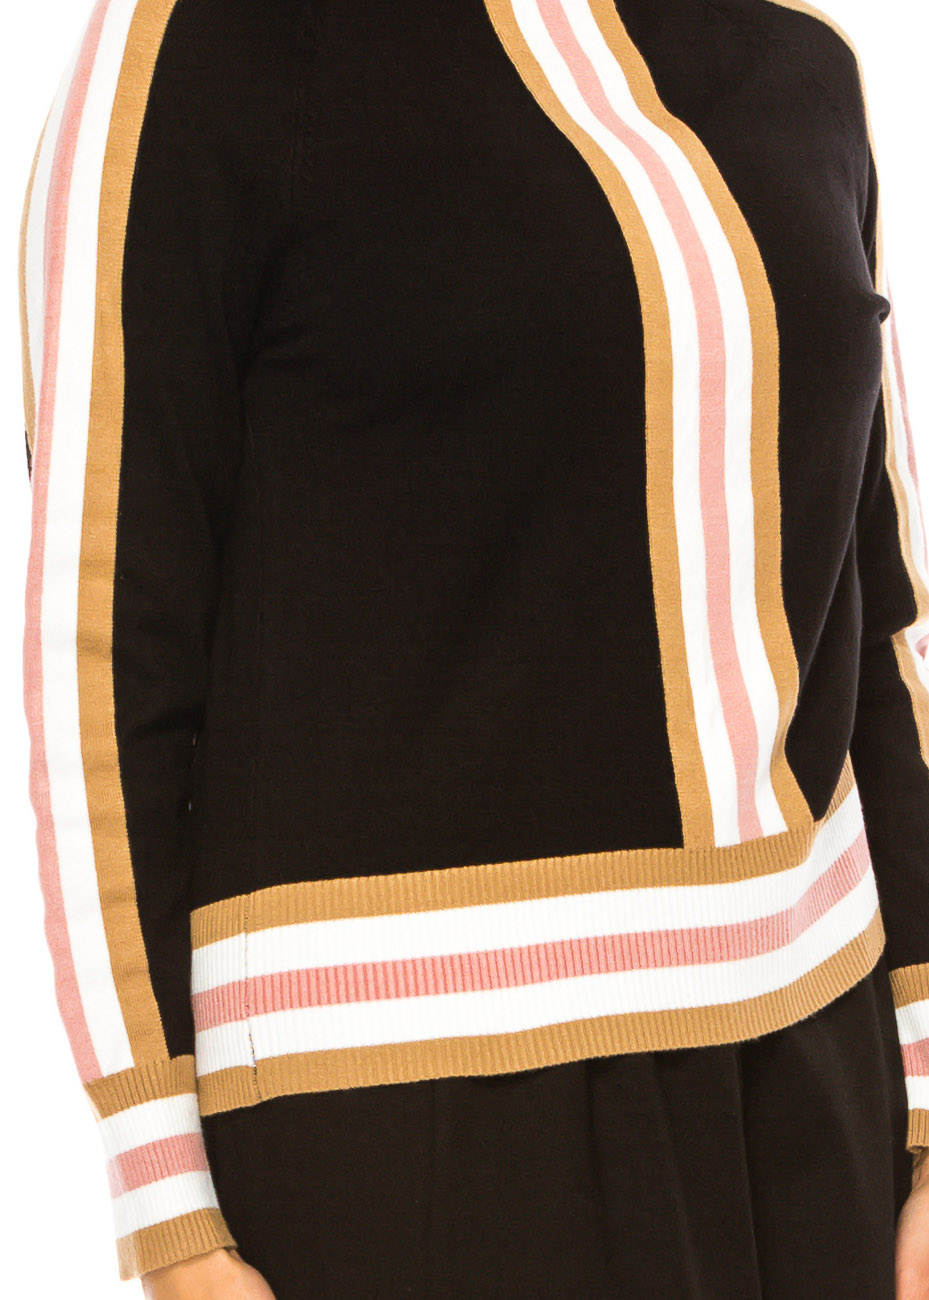 Pink Accented Black Knit Top